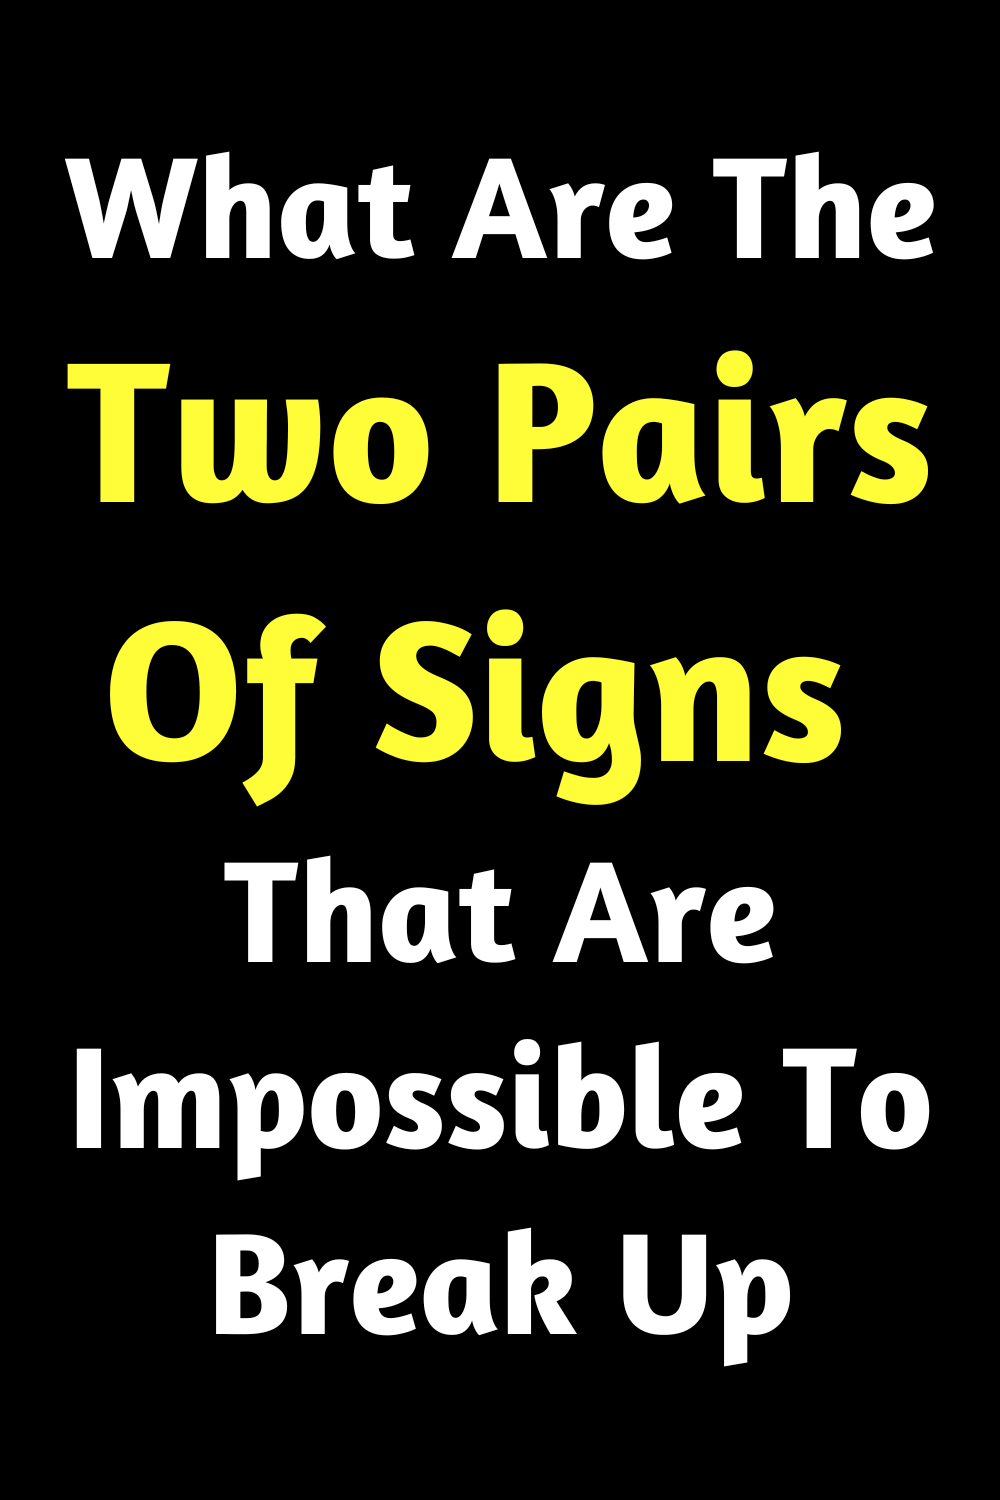 What Are The Two Pairs Of Signs That Are Impossible To Break Up